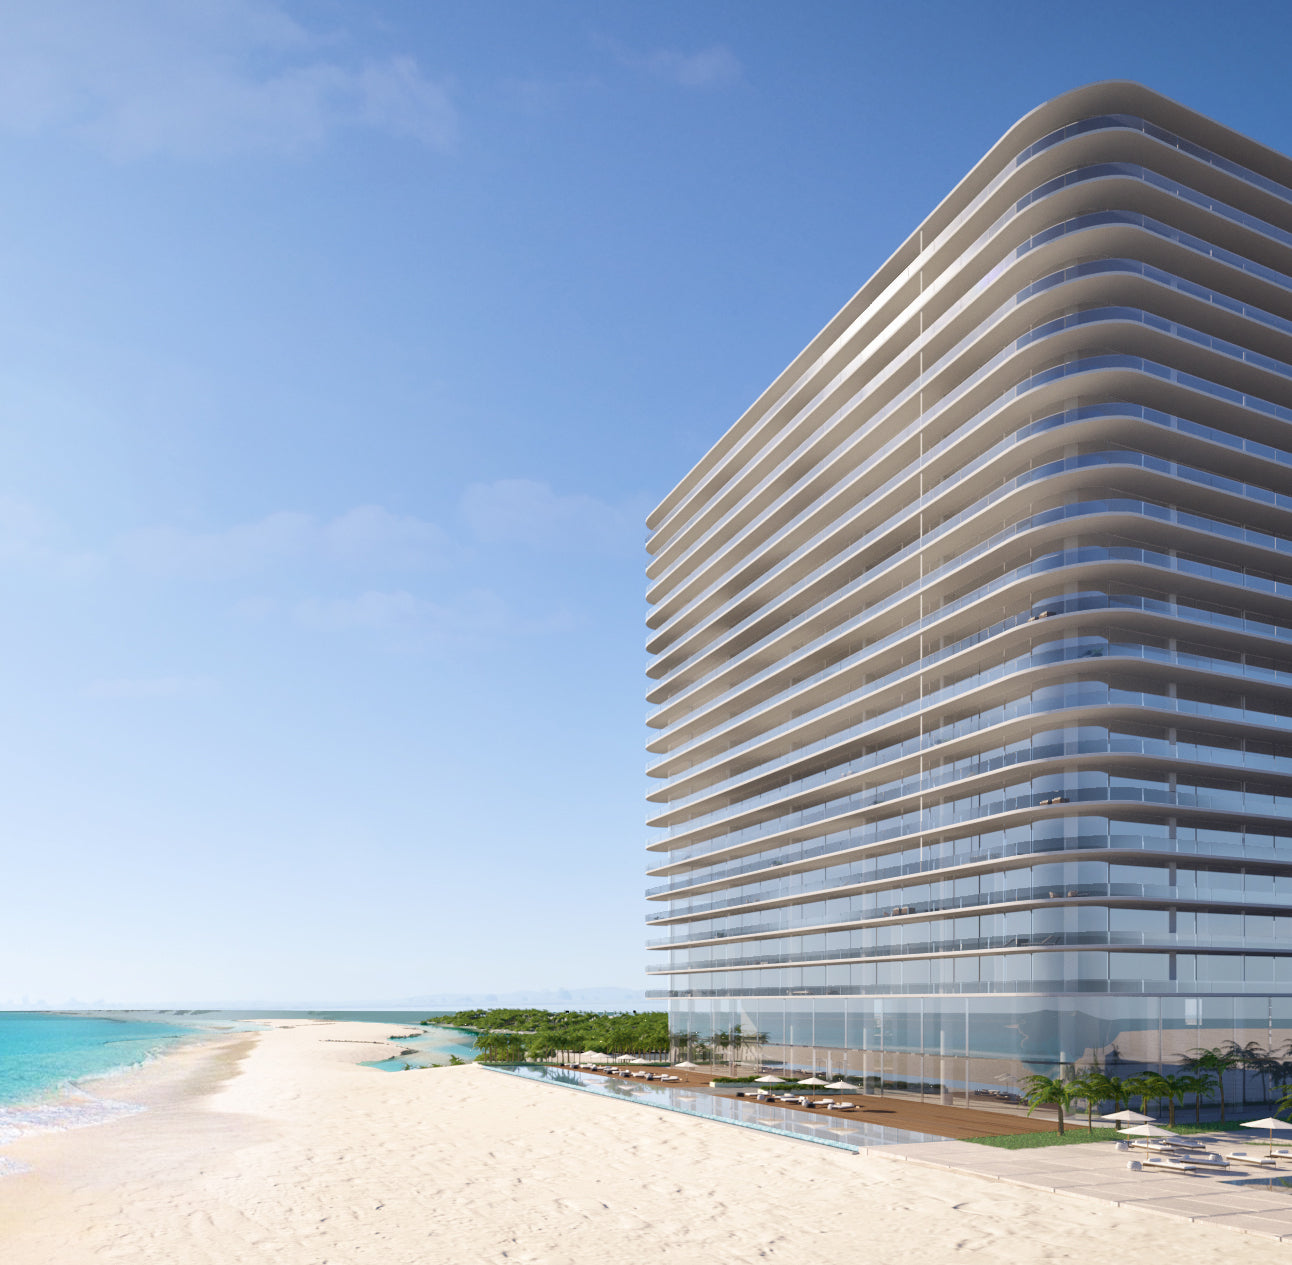 SLS HOTEL AND RESIDENCES, CANCUN, MEXICO